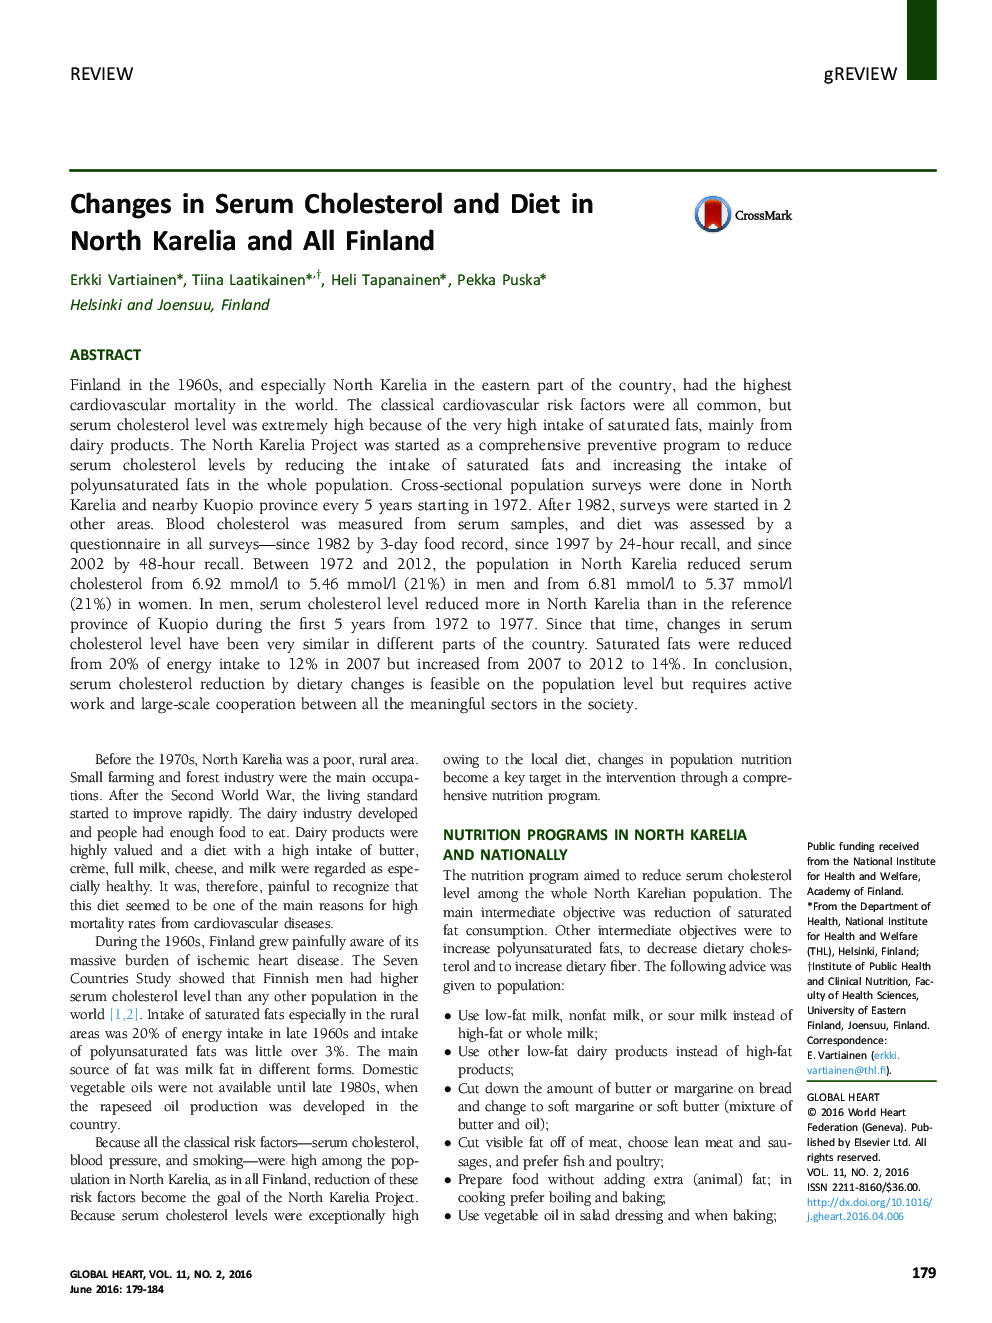 Changes in Serum Cholesterol and Diet in North Karelia and All Finland 